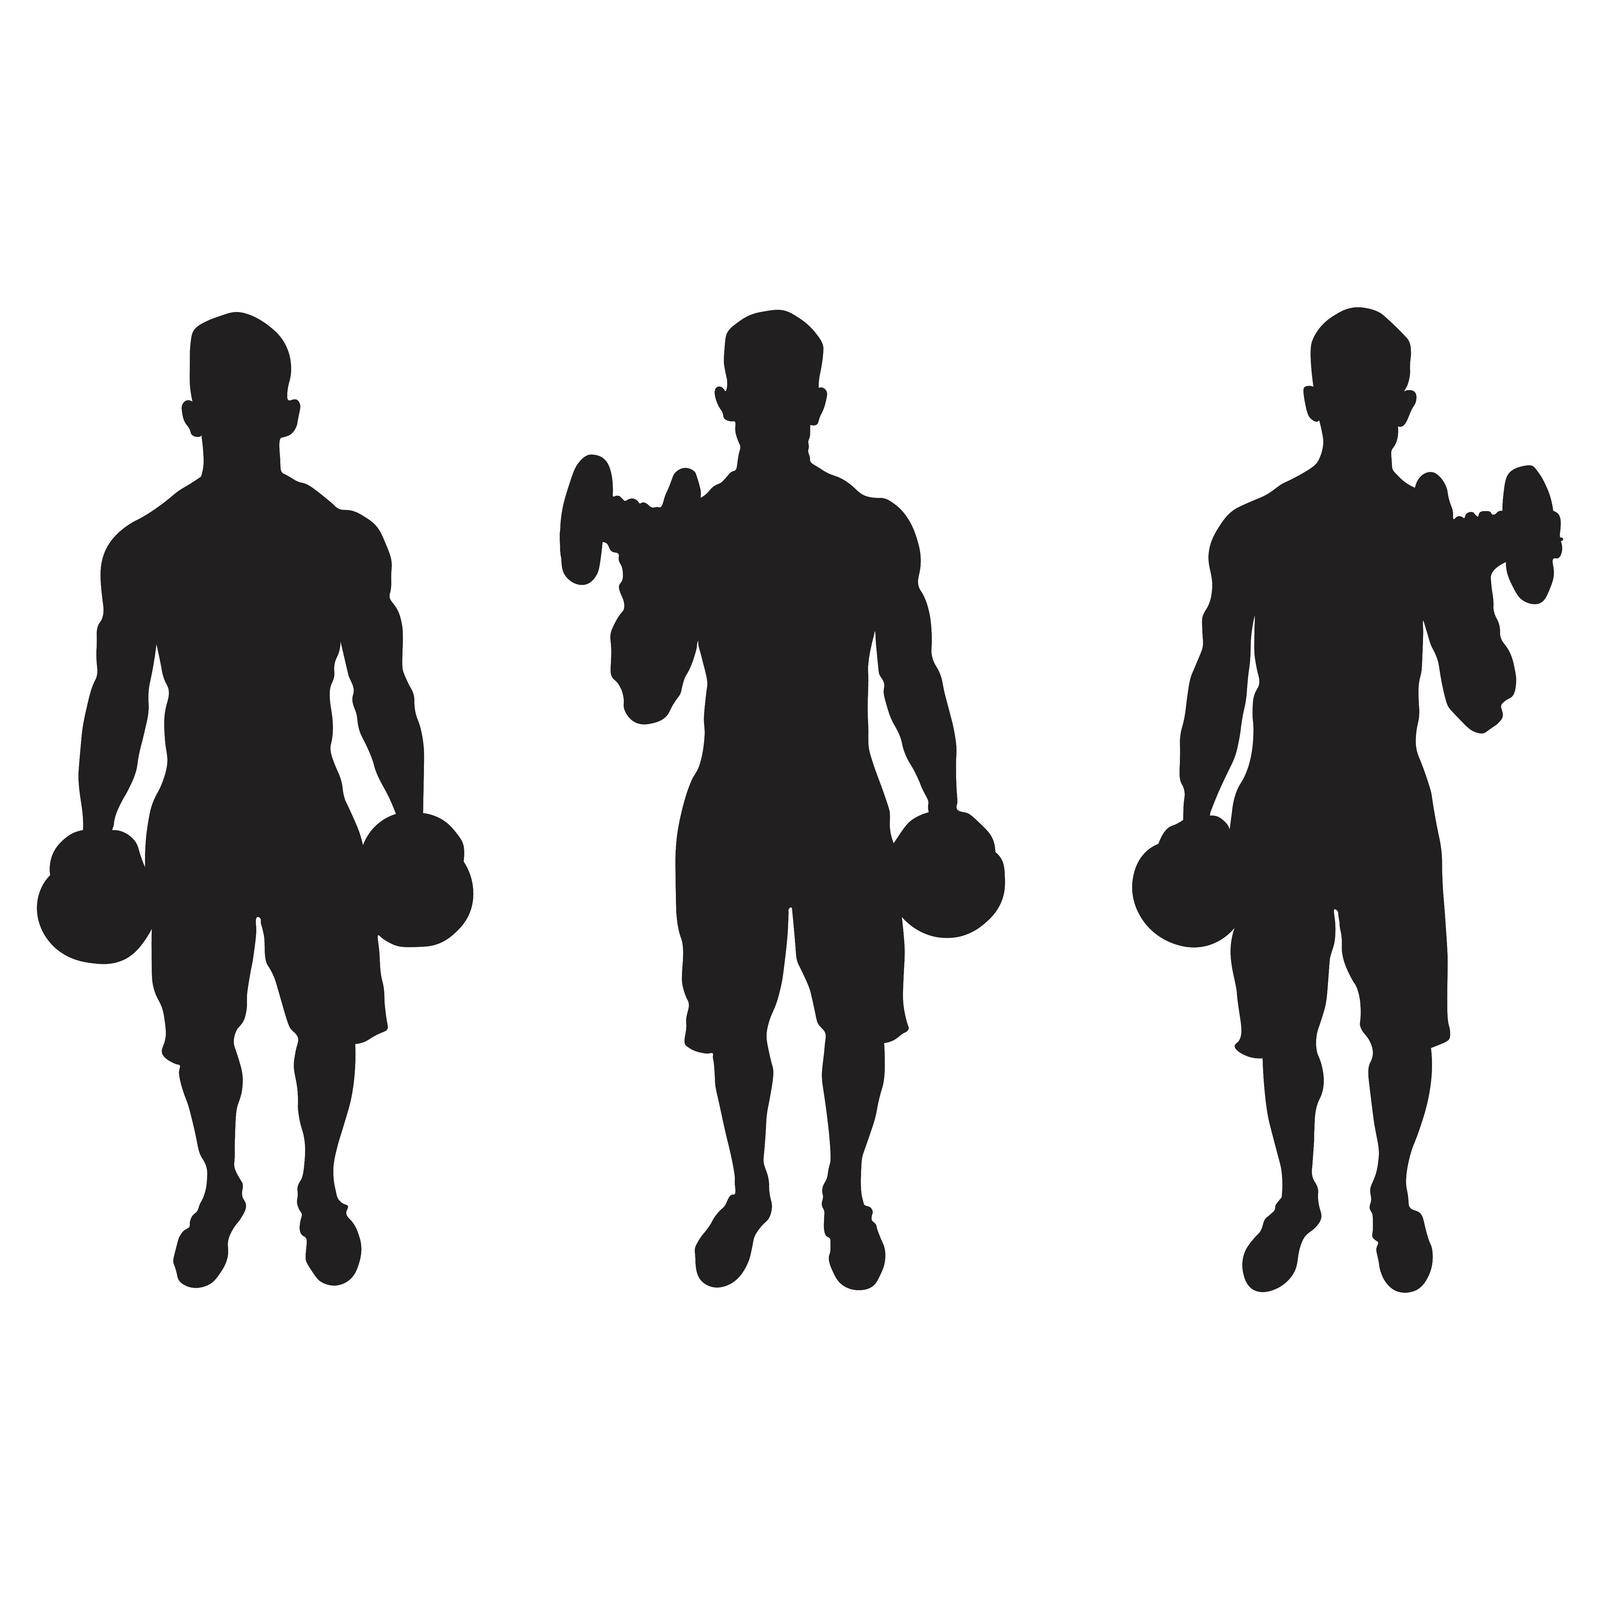 A set of silhouette depicting man doing alternating bicep curls arm exercise isolated on a white background. EPS Vector by xileodesigns